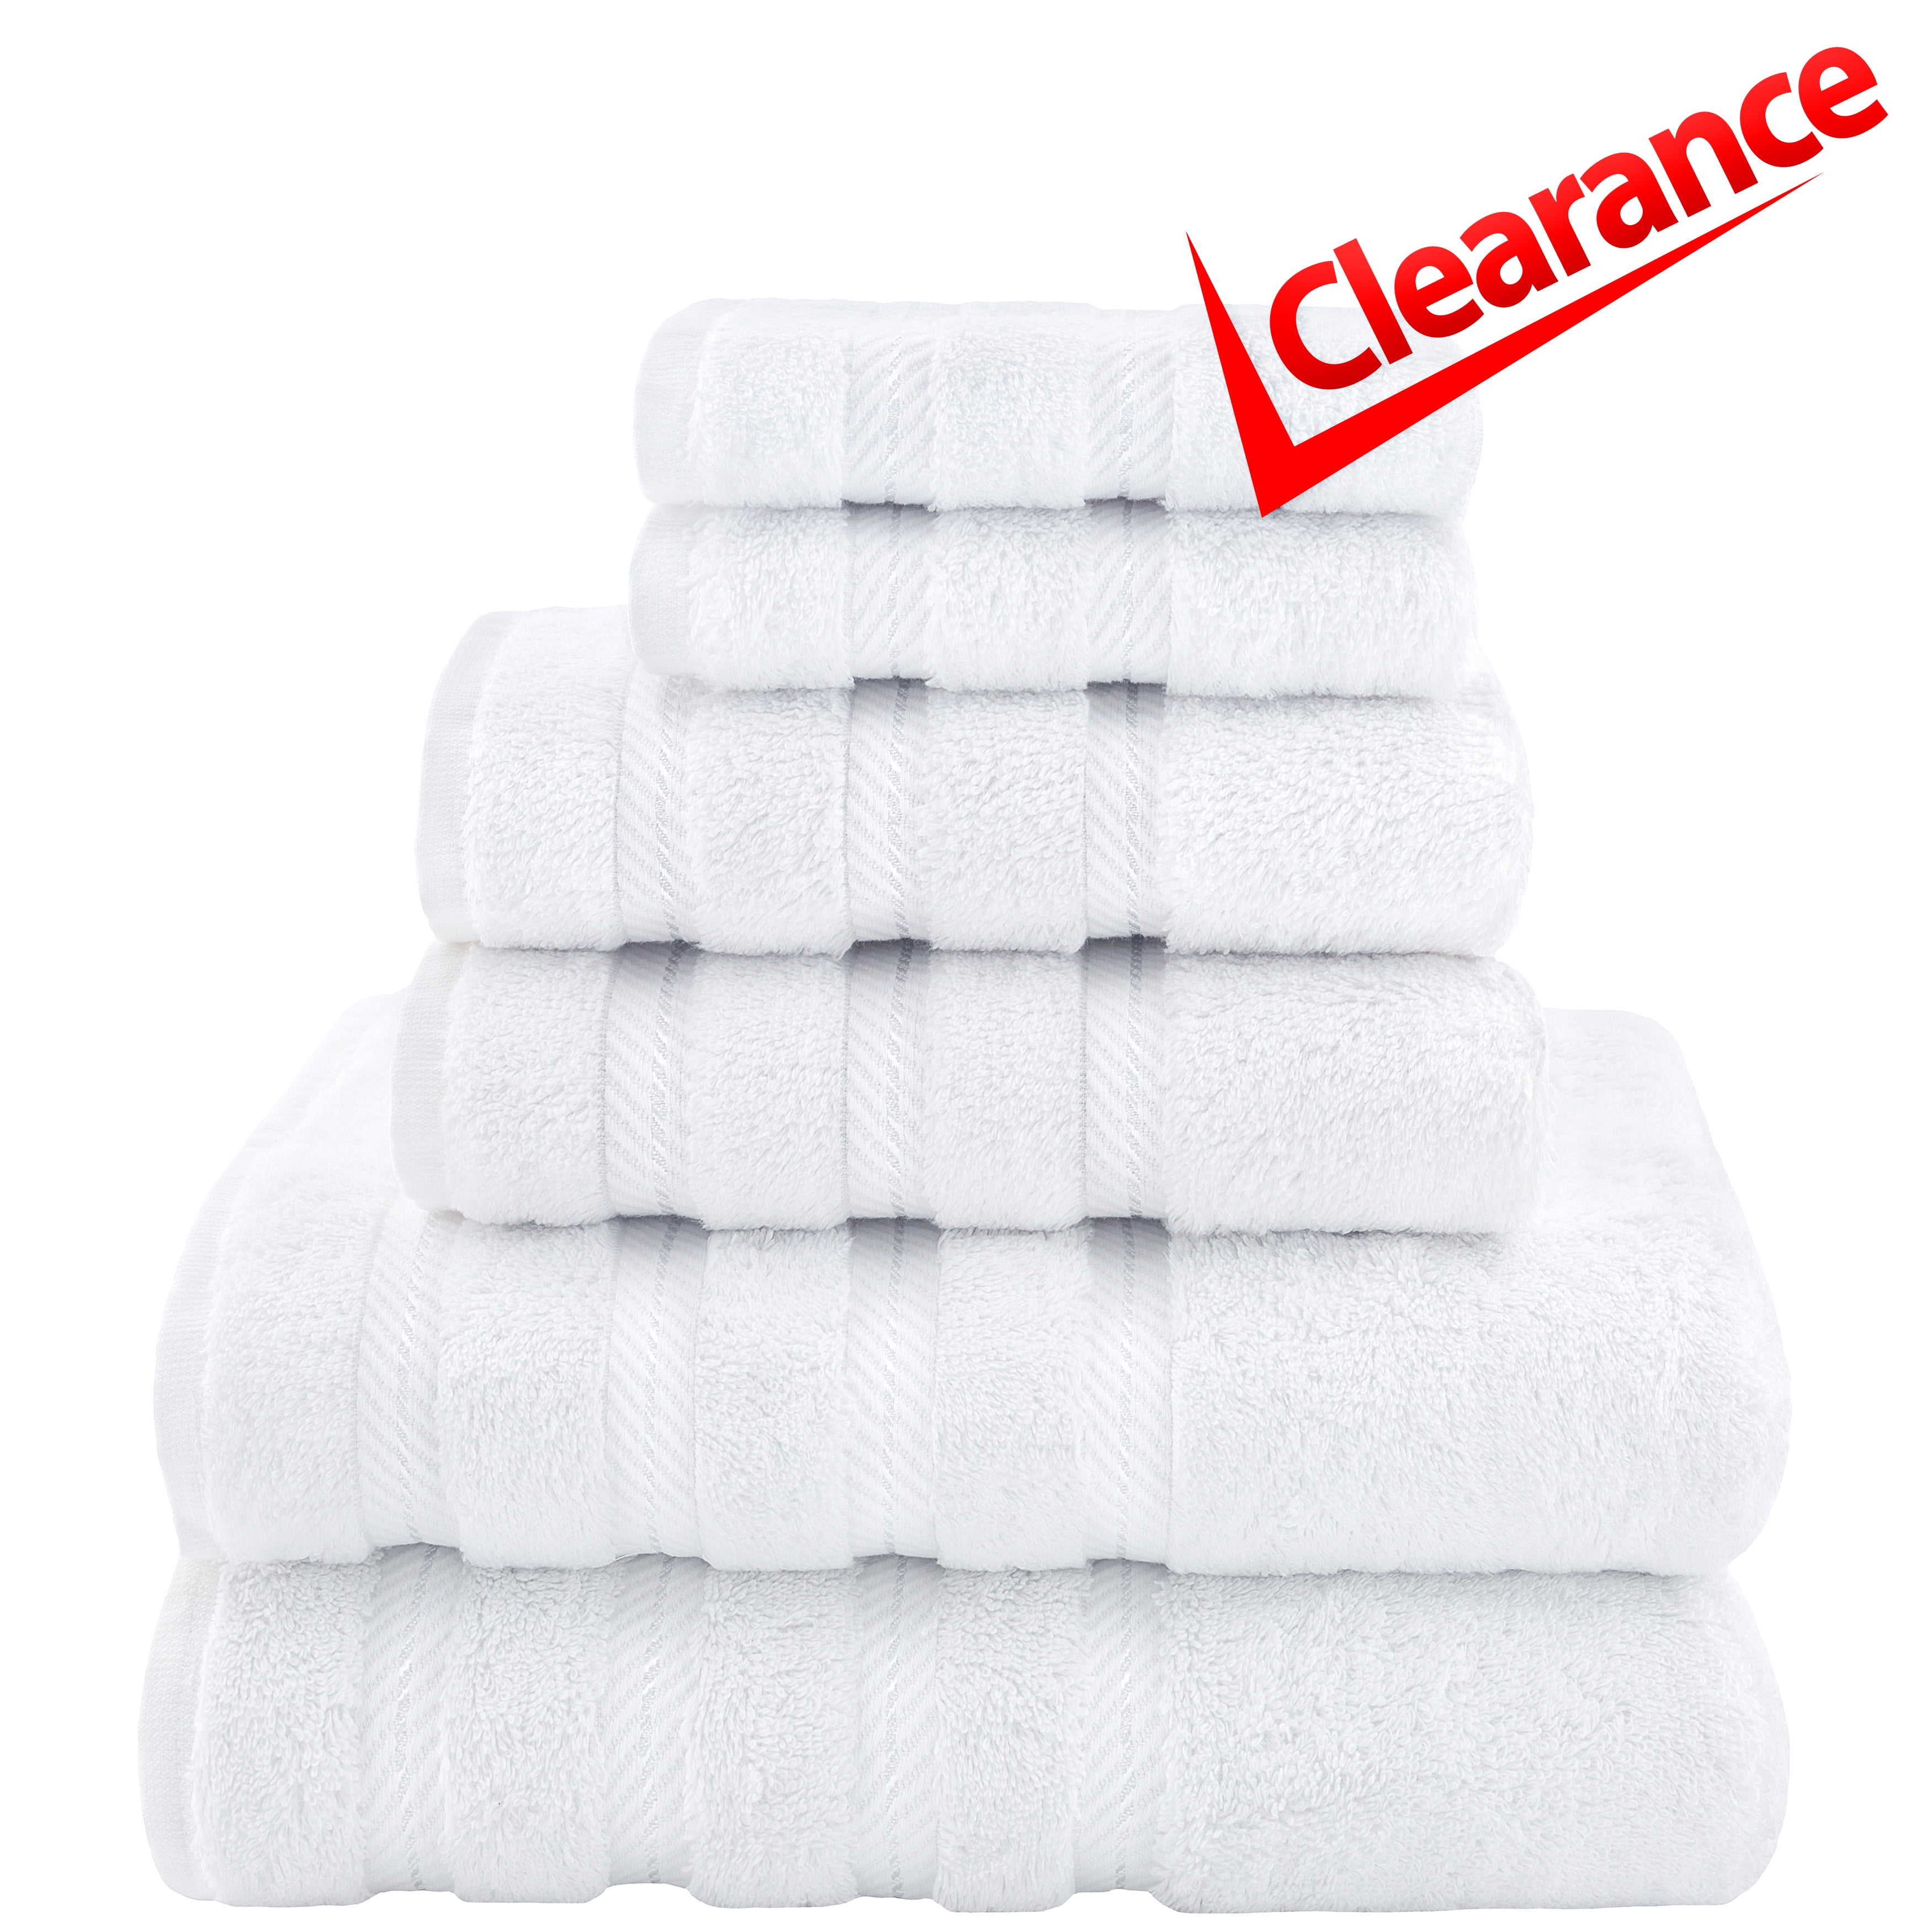 Details about   Mainstays Value 10-Pc Cotton Towel Set with Upgraded Softness&Durability,Blush 